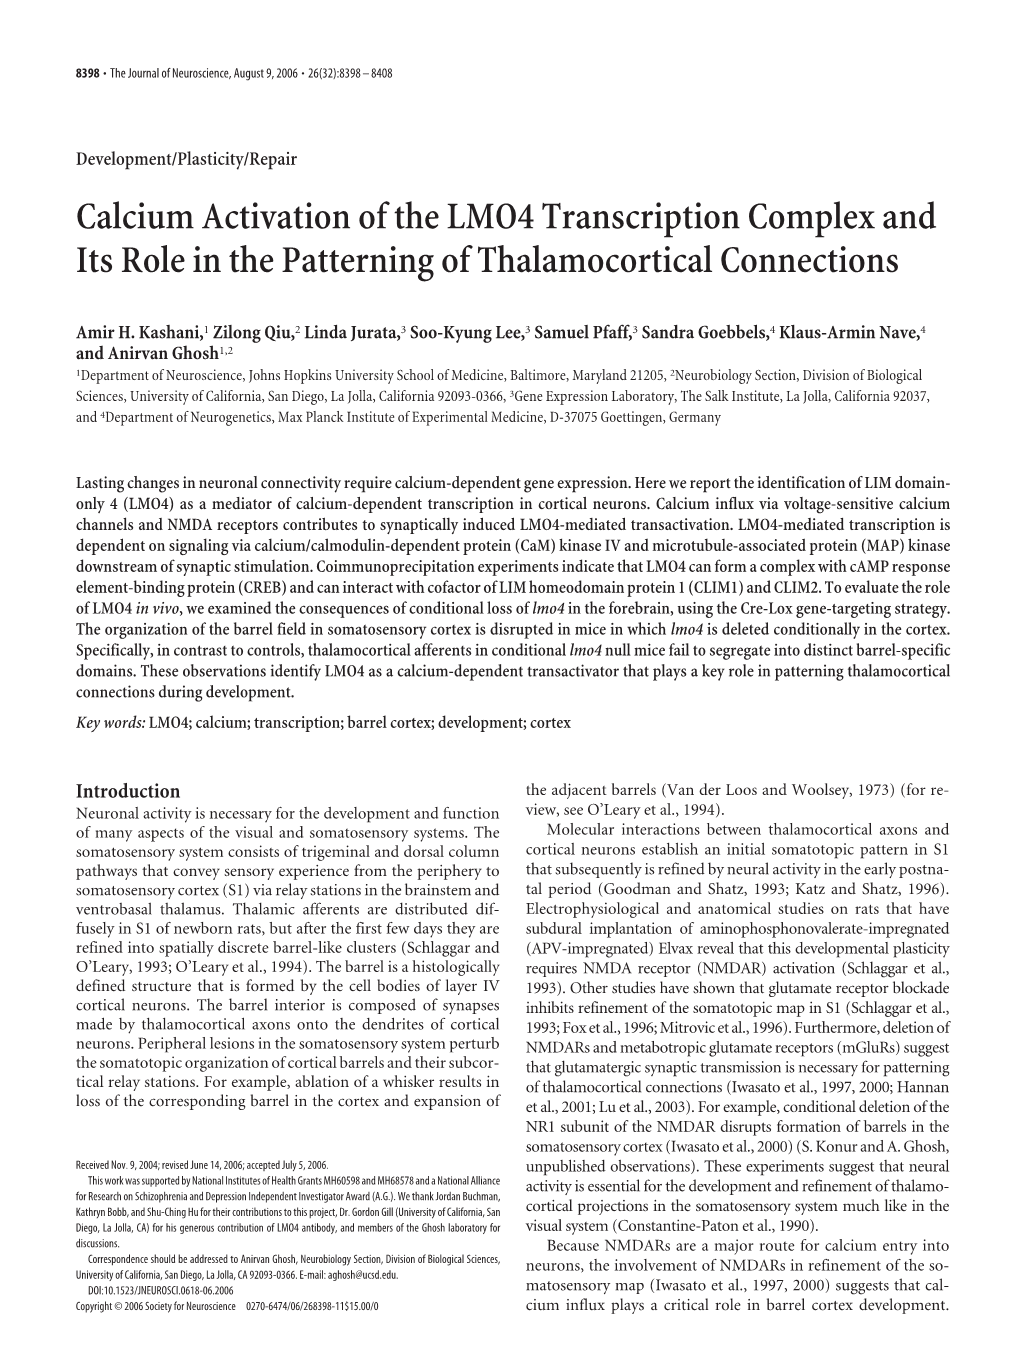 Calcium Activation of the LMO4 Transcription Complex and Its Role in the Patterning of Thalamocortical Connections